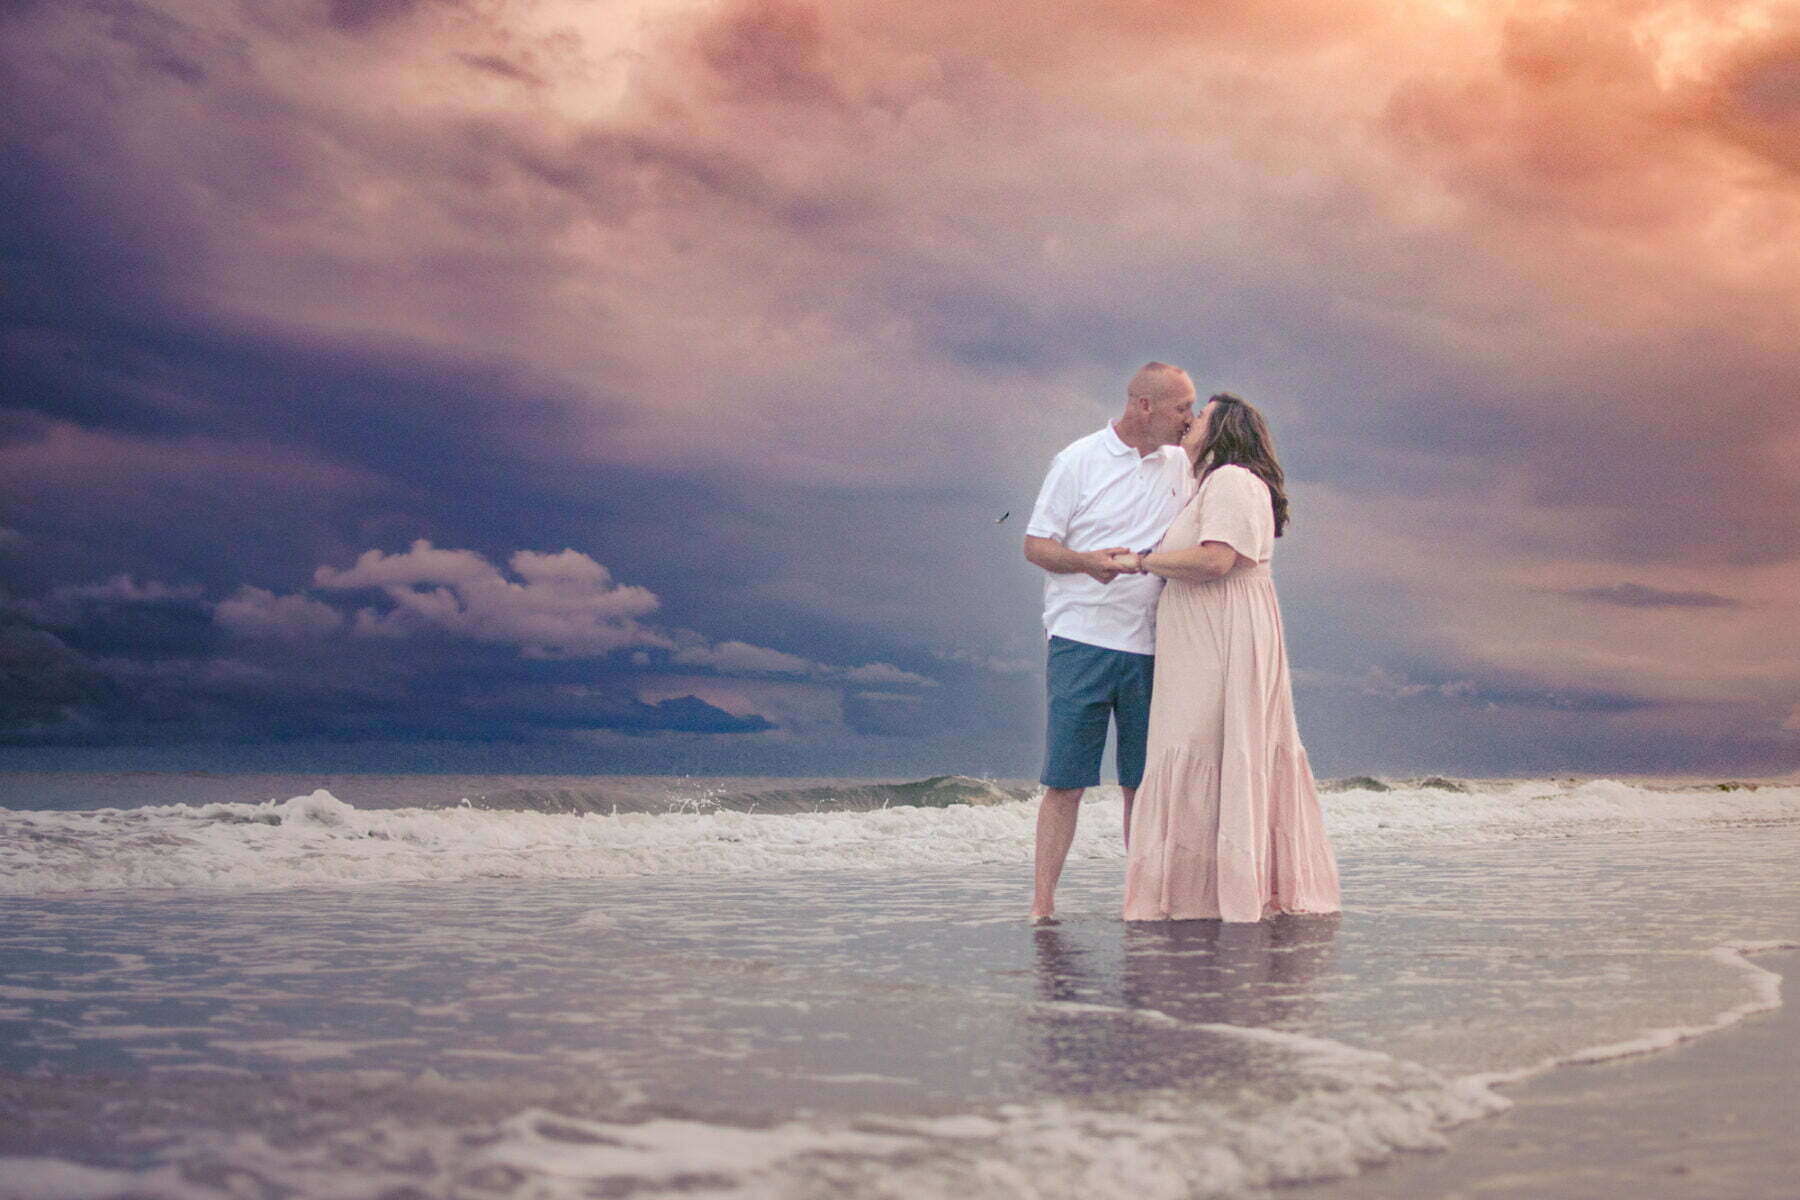 Adventure couples portrait photography at sunset in Holden Beach, NC.